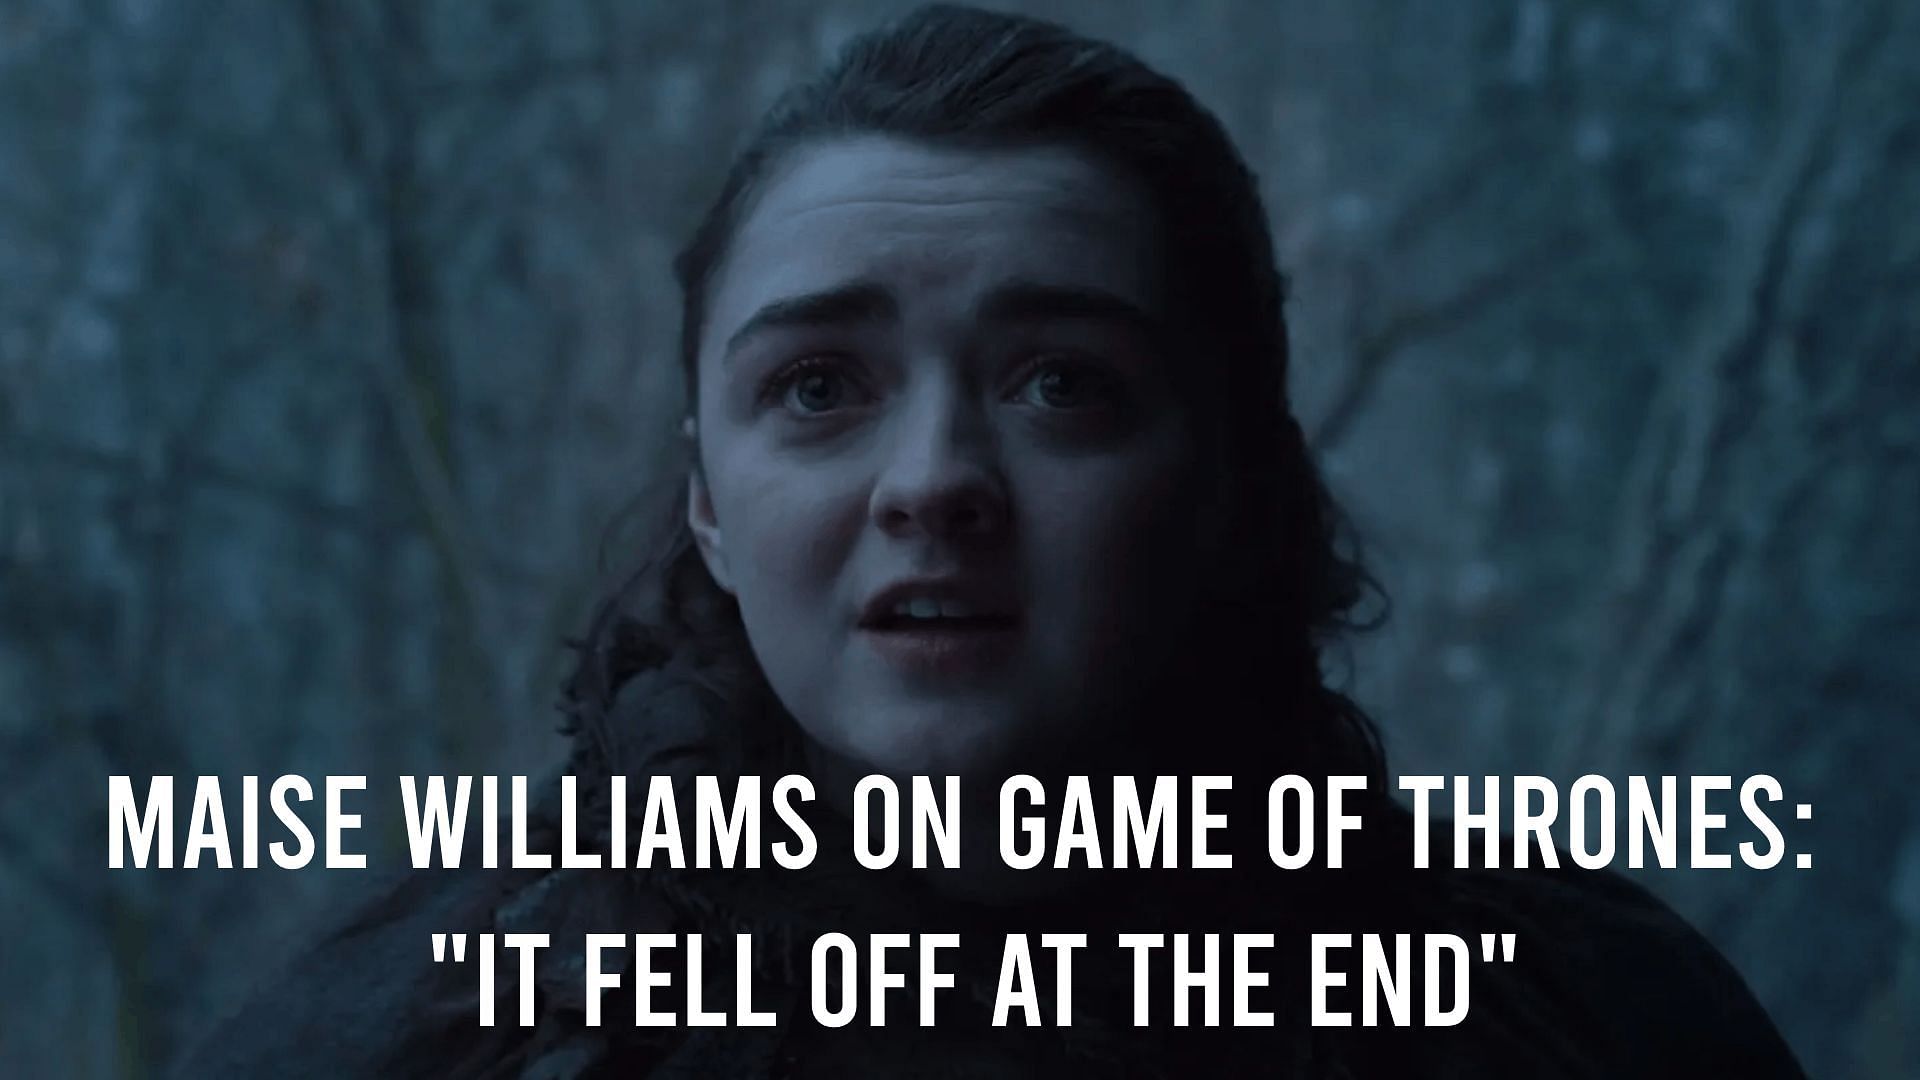 Maisie Willaims criticizes how Game of Thrones ends on her brother